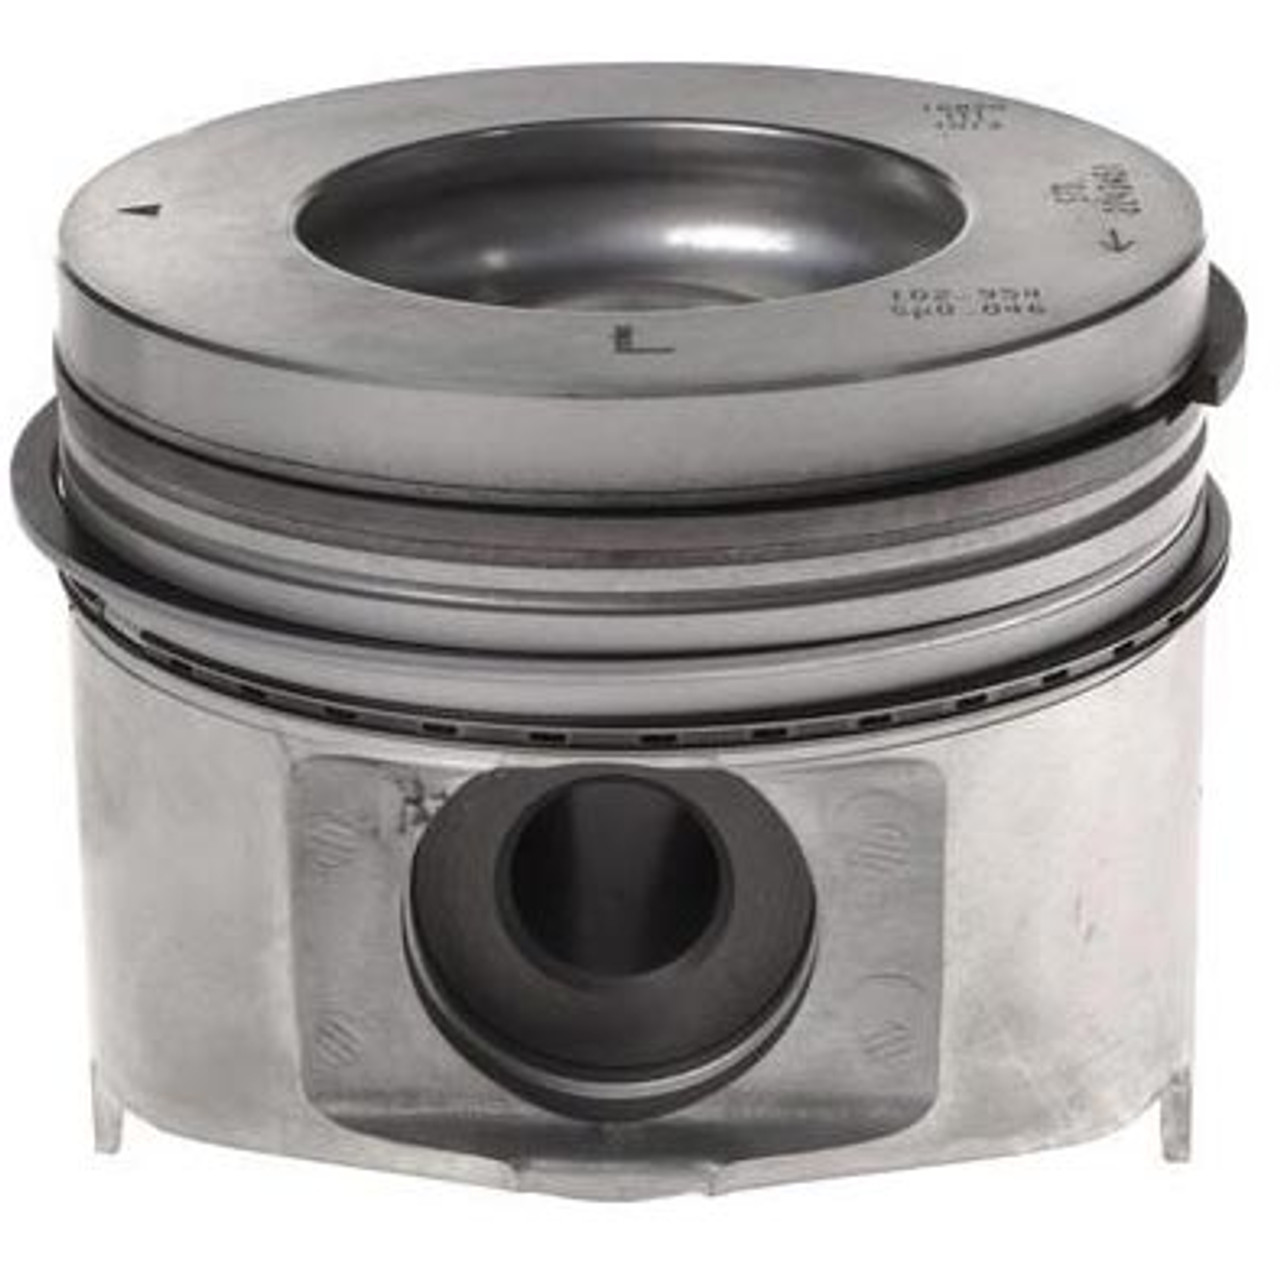 Mahle Piston With Rings (Standard, Left Bank) 2001 to 2005 6.6L LB7/LLY Duramax (MCI224-3451WR)-Main View